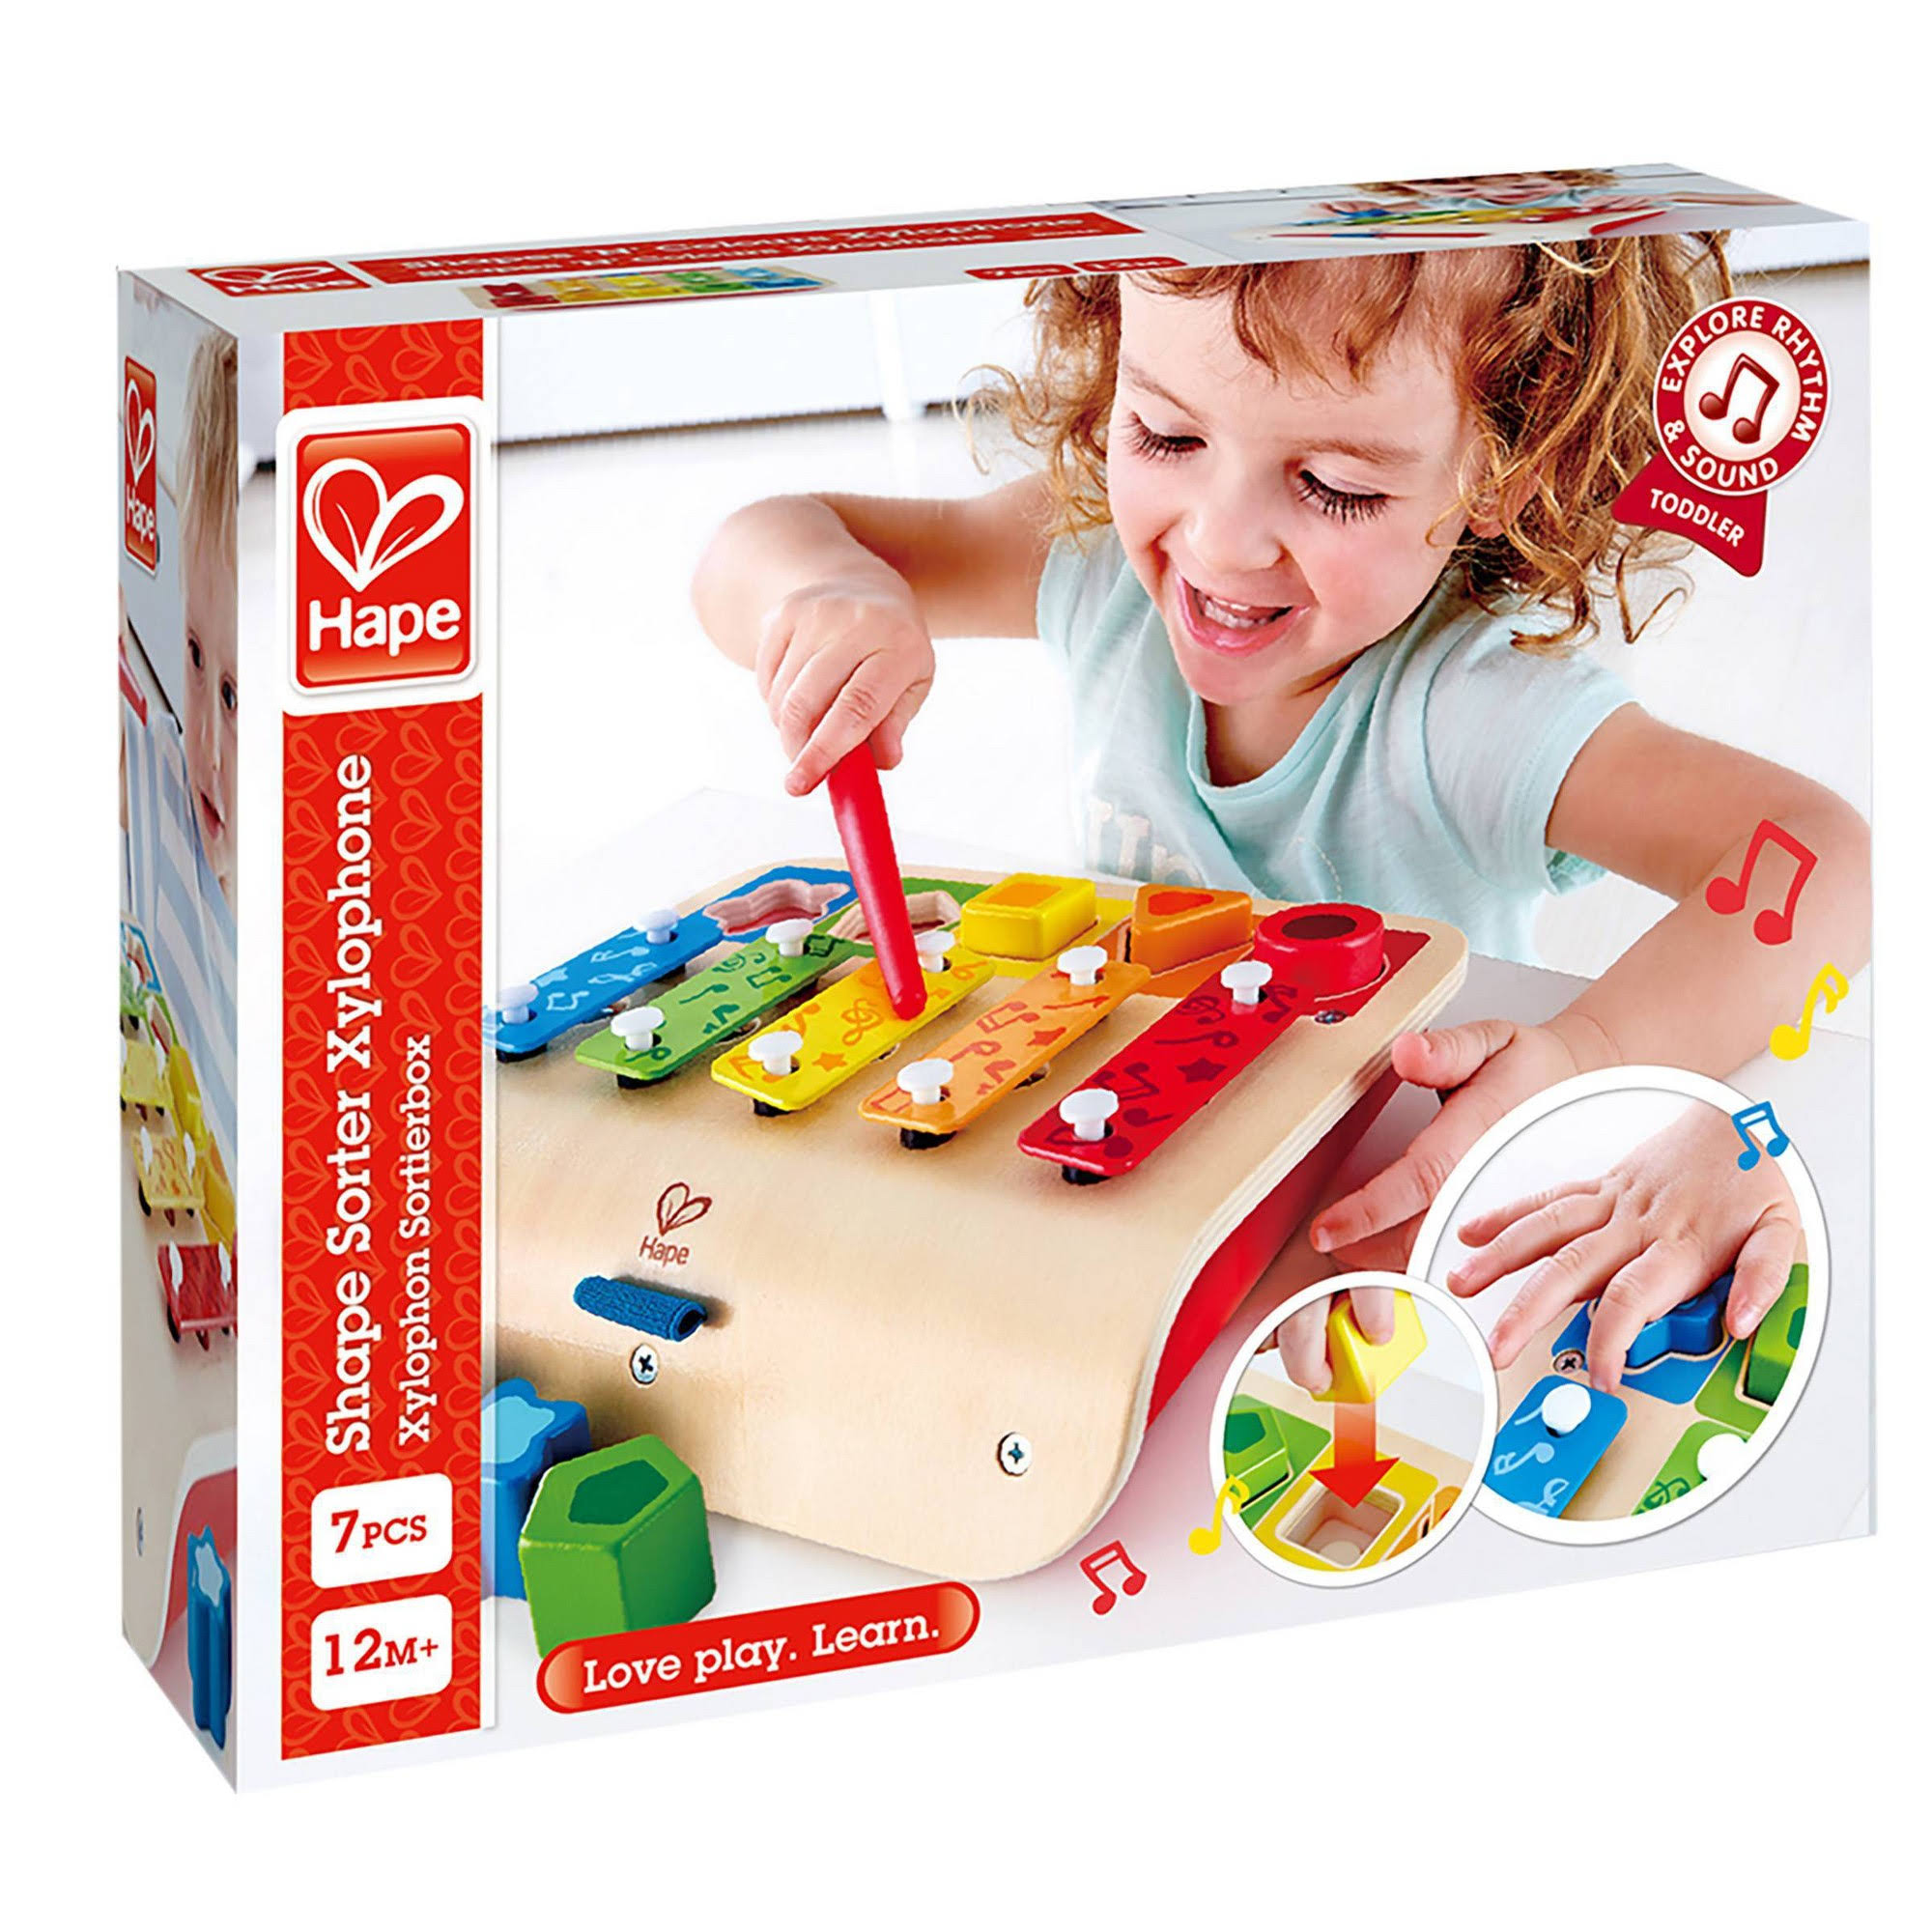 Hape Rollenspiel My First Xylophone & Piano Baby Toy